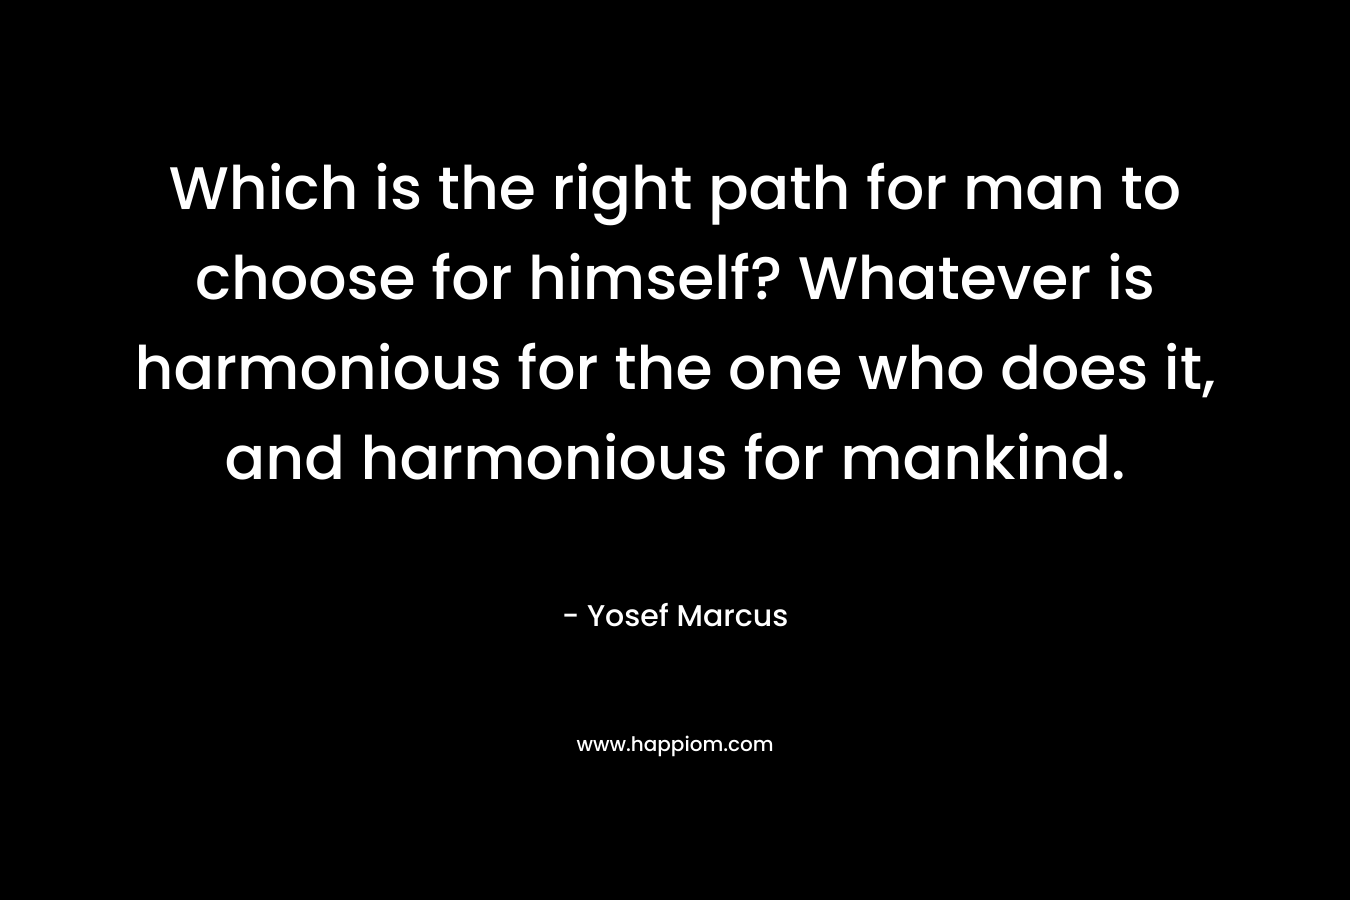 Which is the right path for man to choose for himself? Whatever is harmonious for the one who does it, and harmonious for mankind.